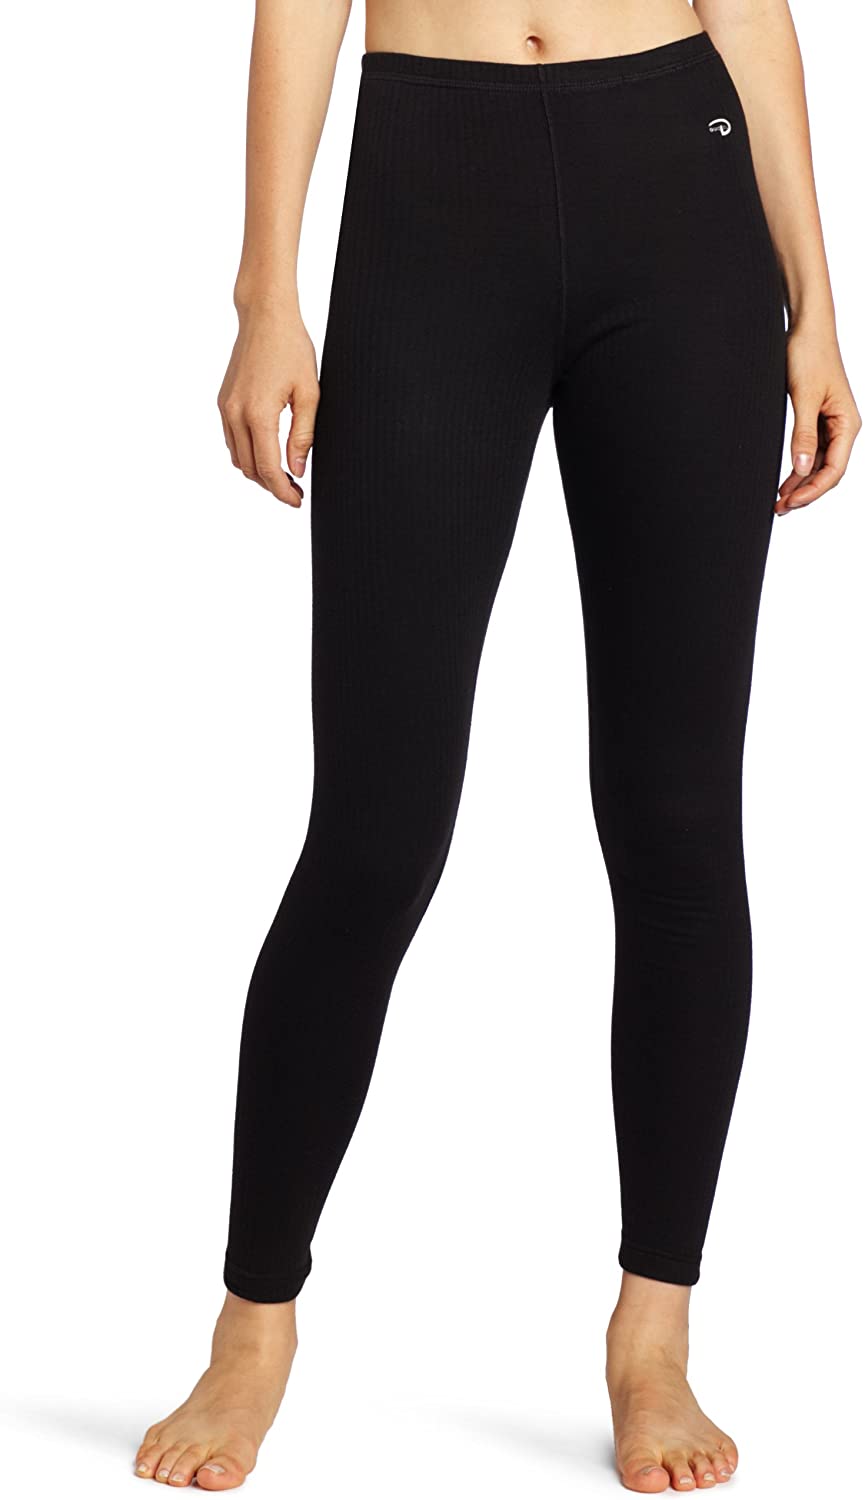 Duofold Women's Mid Weight Wicking Thermal Legging 